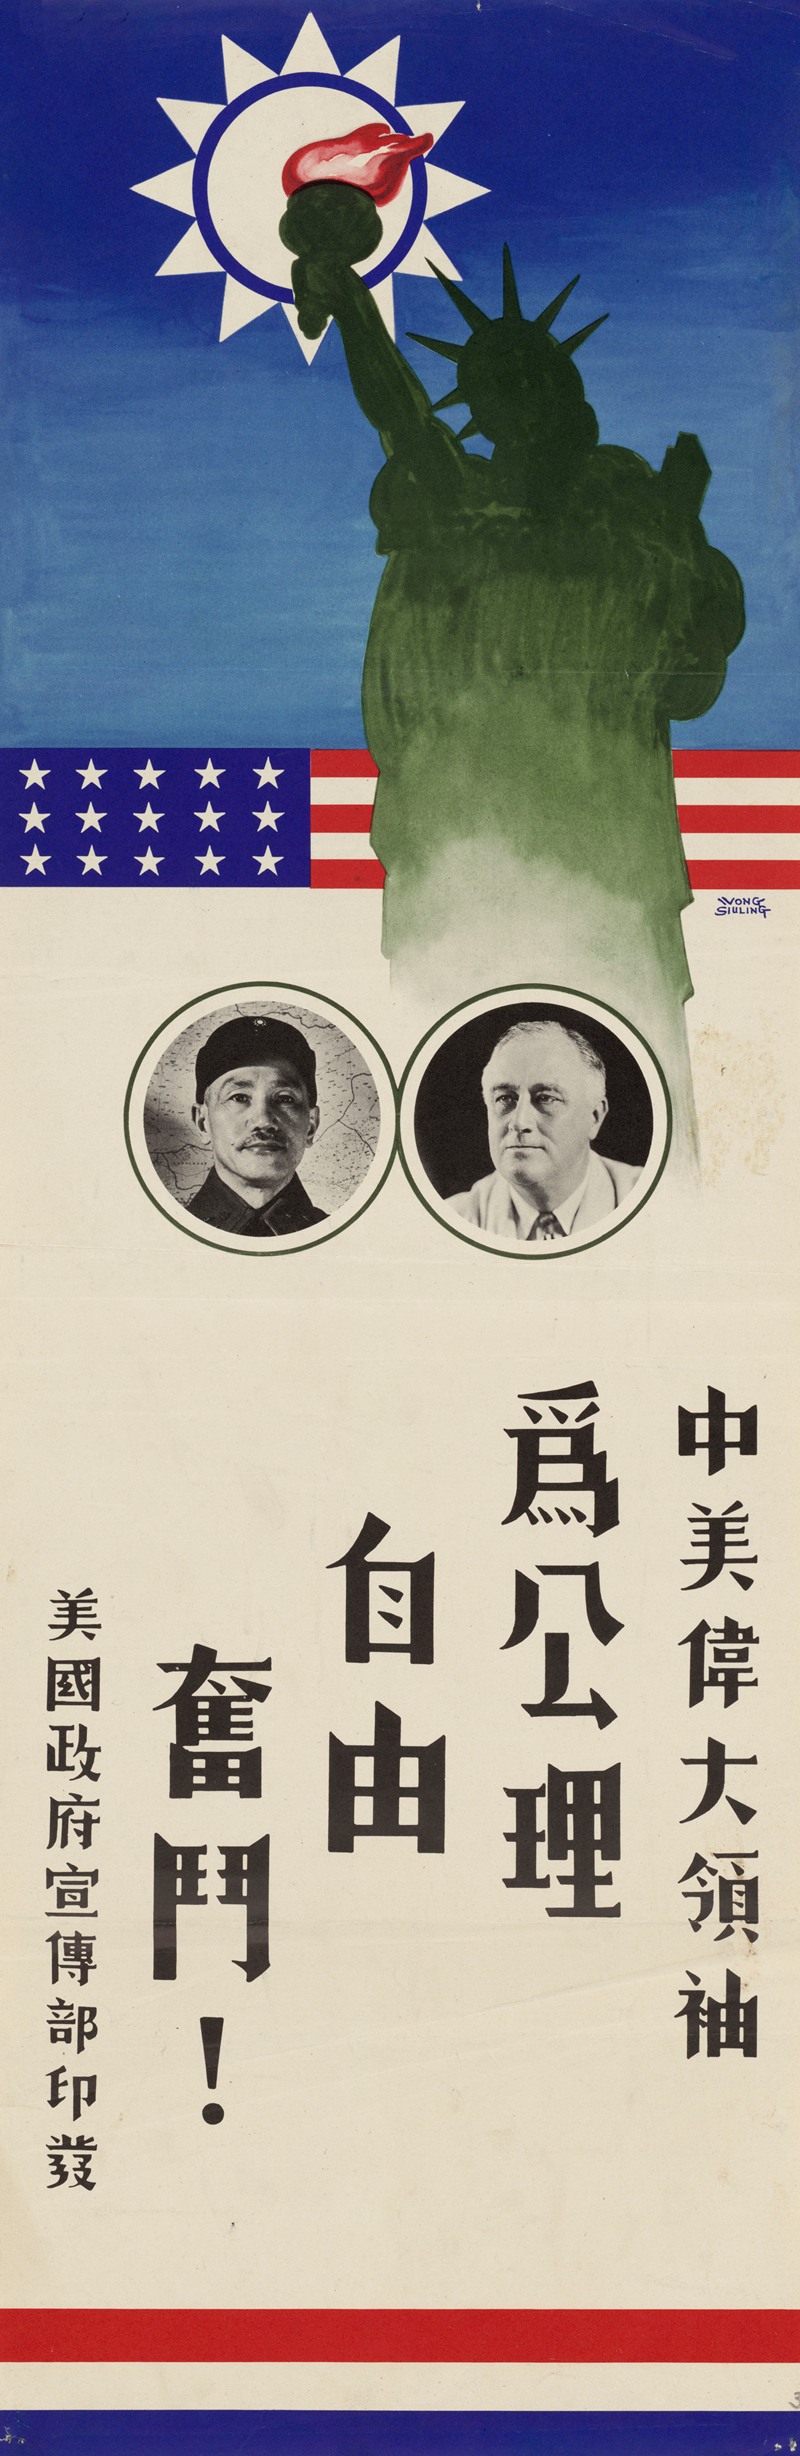 Vong Siuling - Two Great Leaders of China and America are Fighting to Preserve Liberty and Human Rights